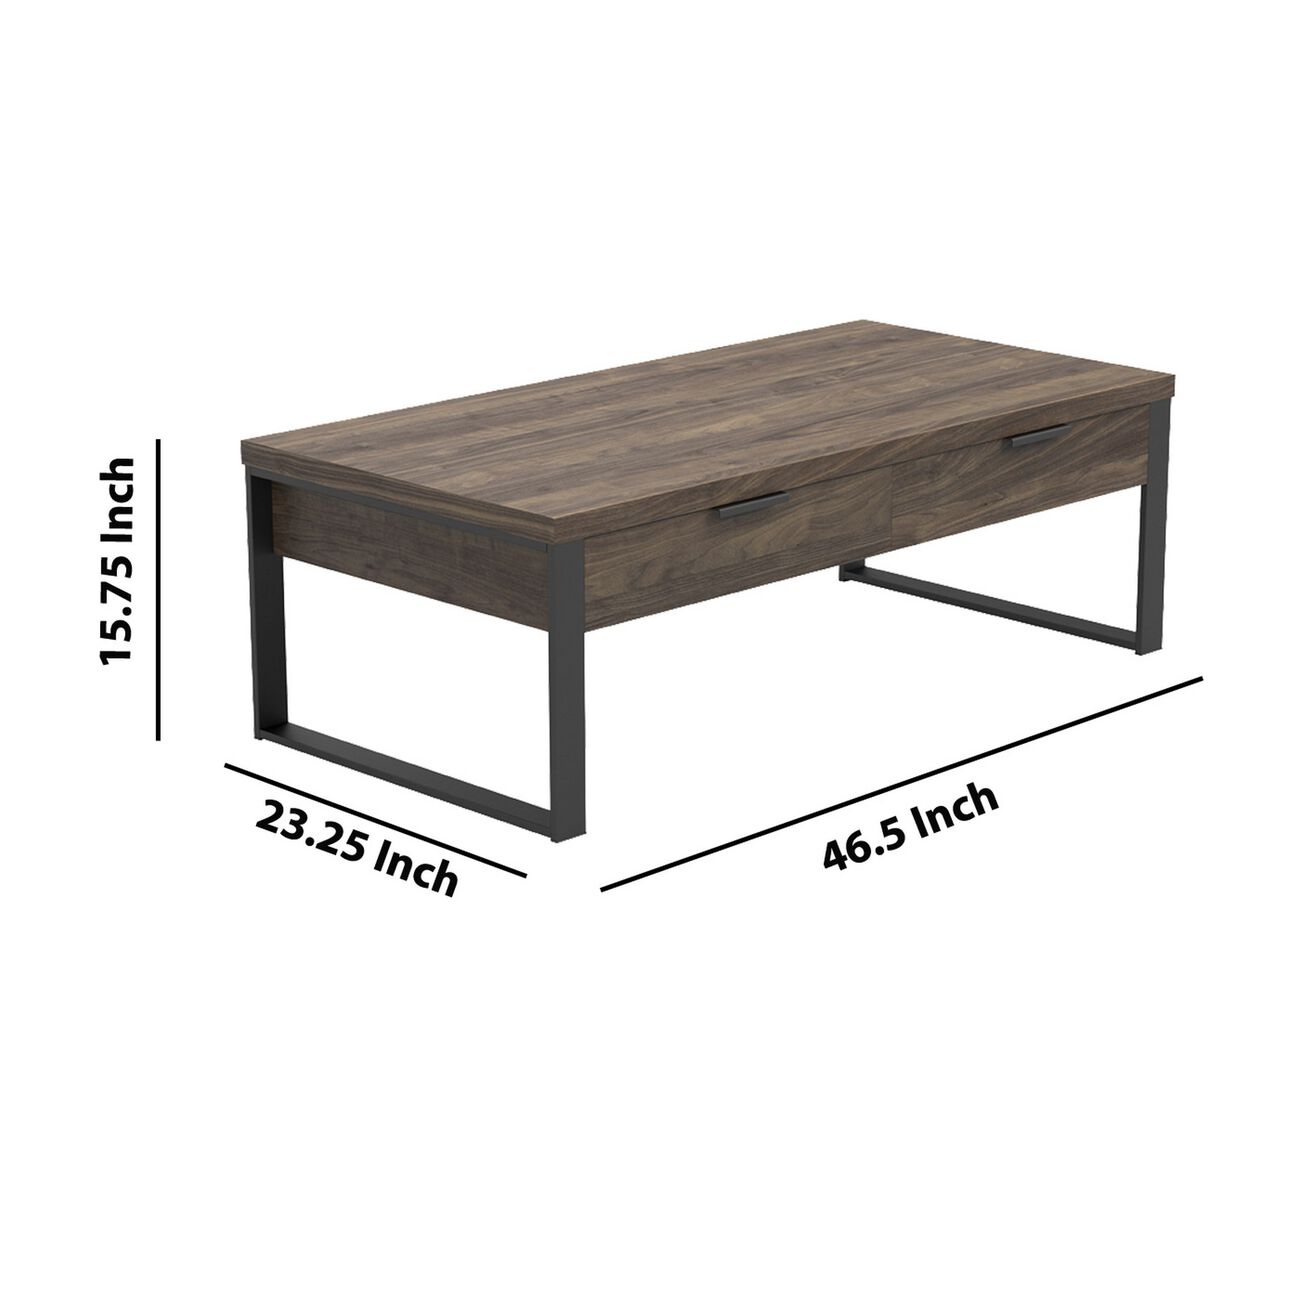 1 Drawer Rectangular Coffee Table with Metal Sled Base, Walnut Brown